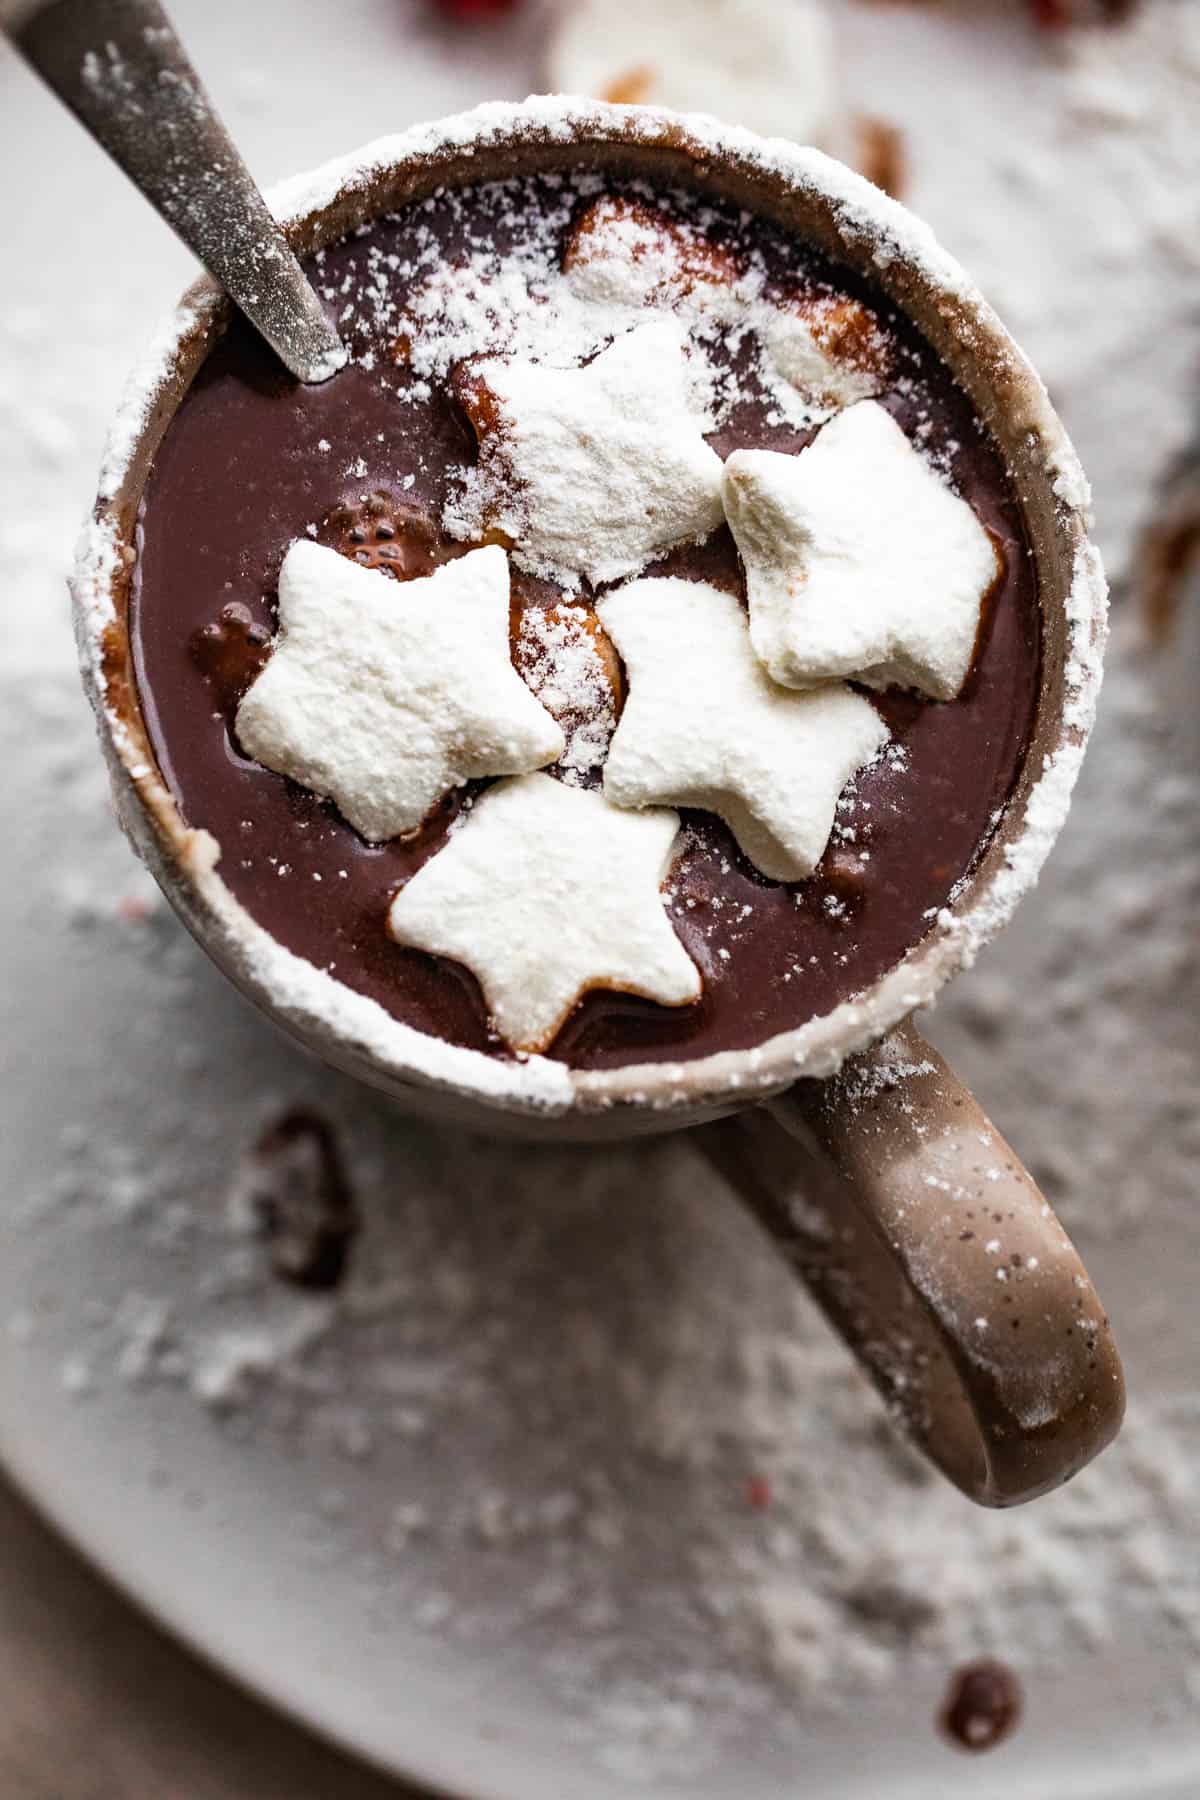 What to Eat With Hot Chocolate? Delicious Pairing Ideas.